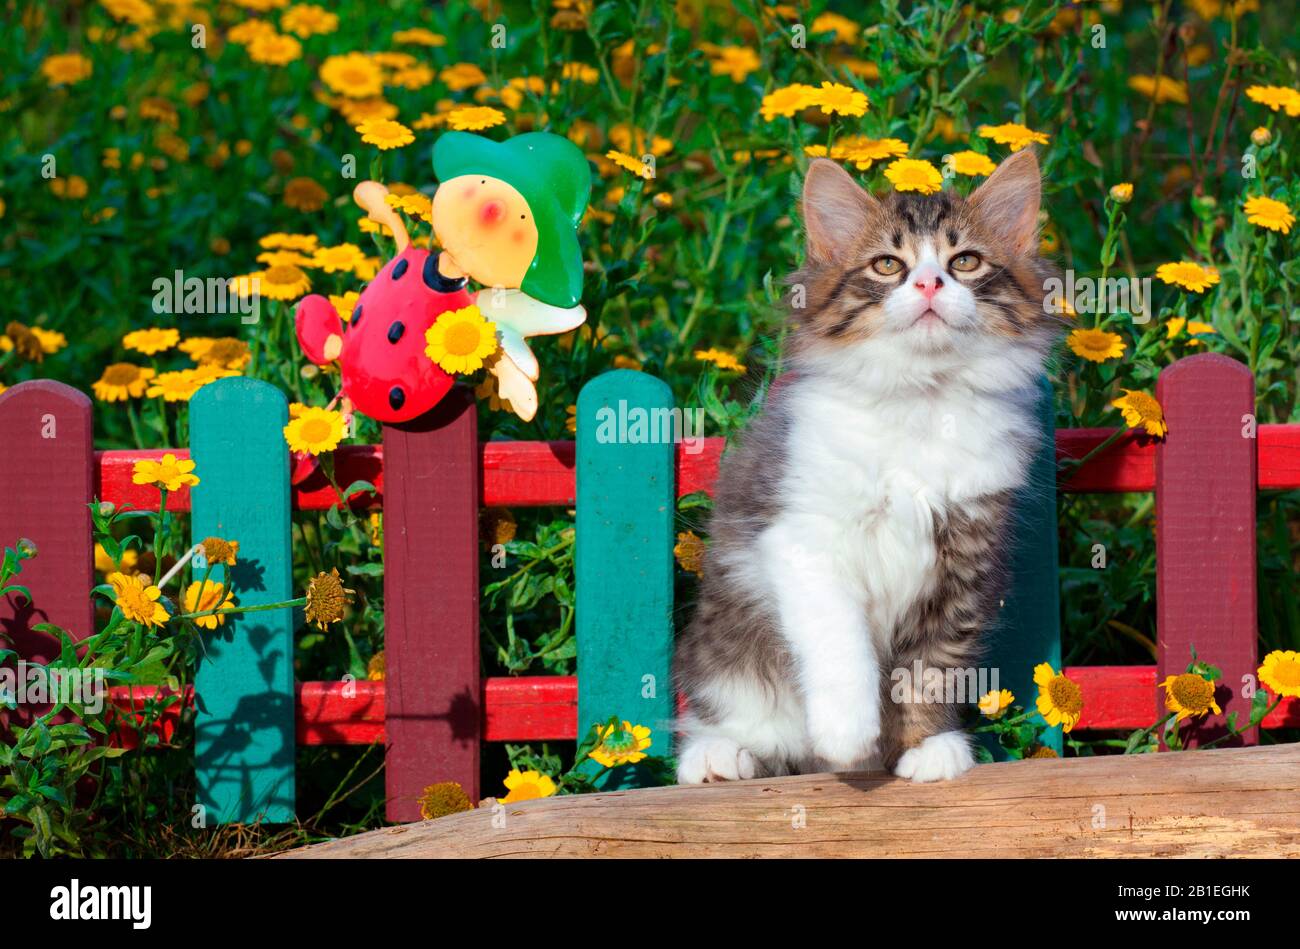 Tabby and white kitten standing by painted wooden fence with yellow flowers in garden Stock Photo